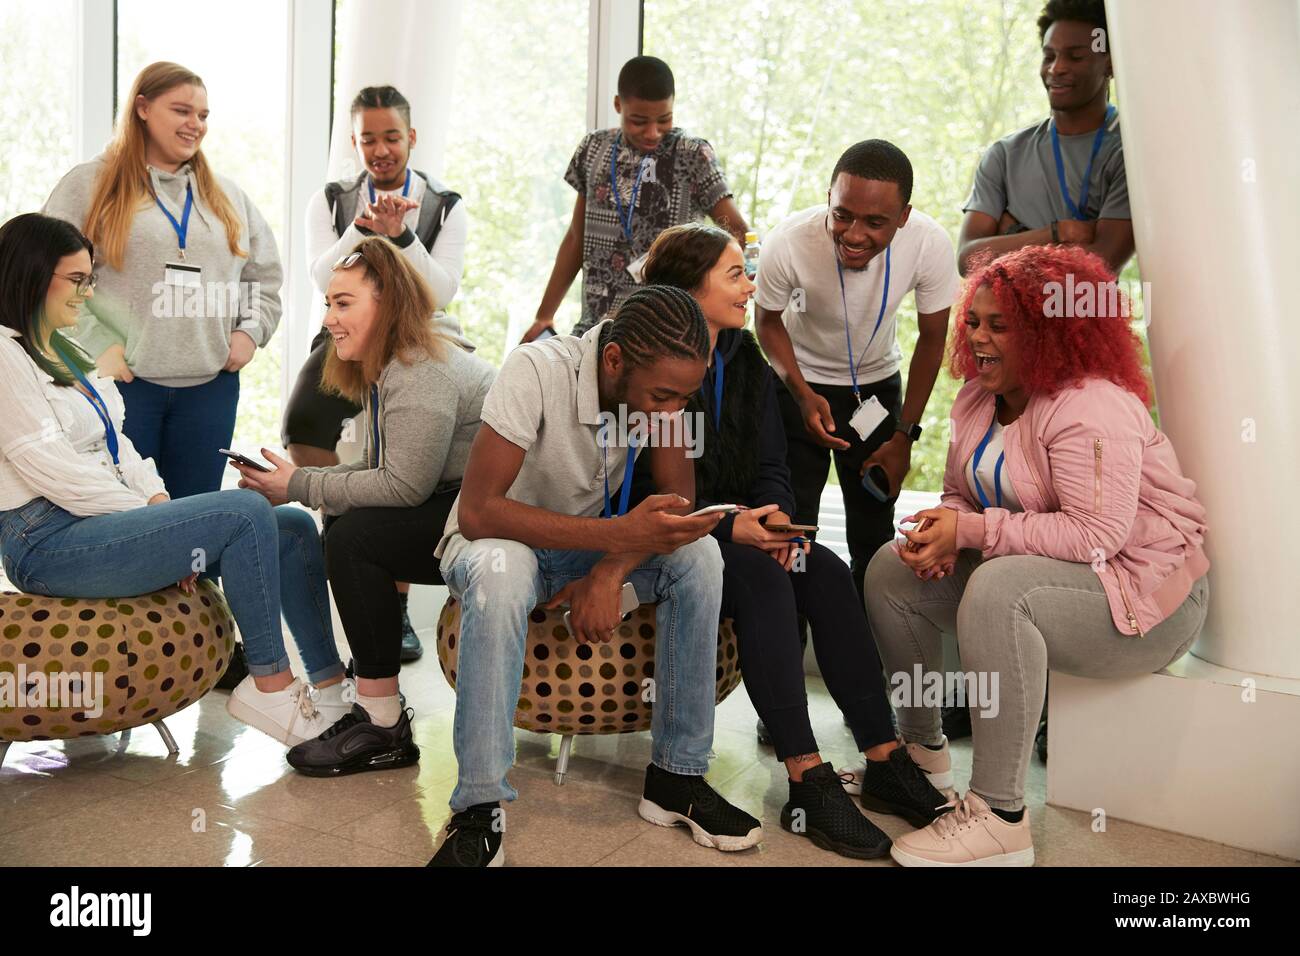 High school students hanging out and using smart phones Stock Photo